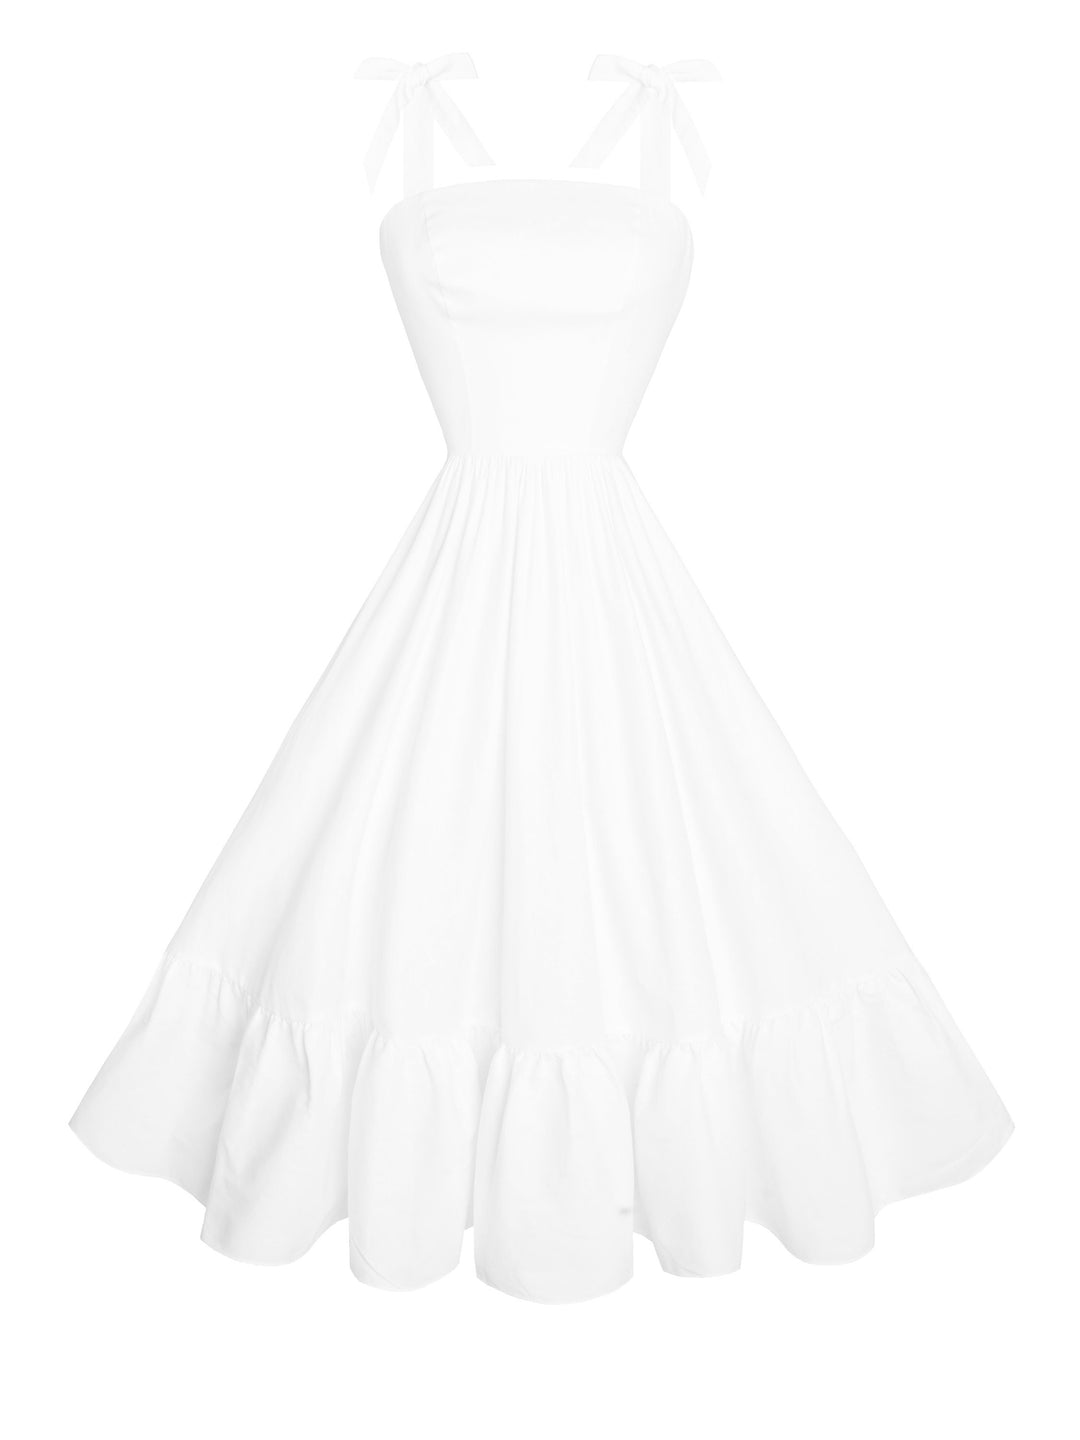 RTS - Size S - Chelsea Dress in White Cotton